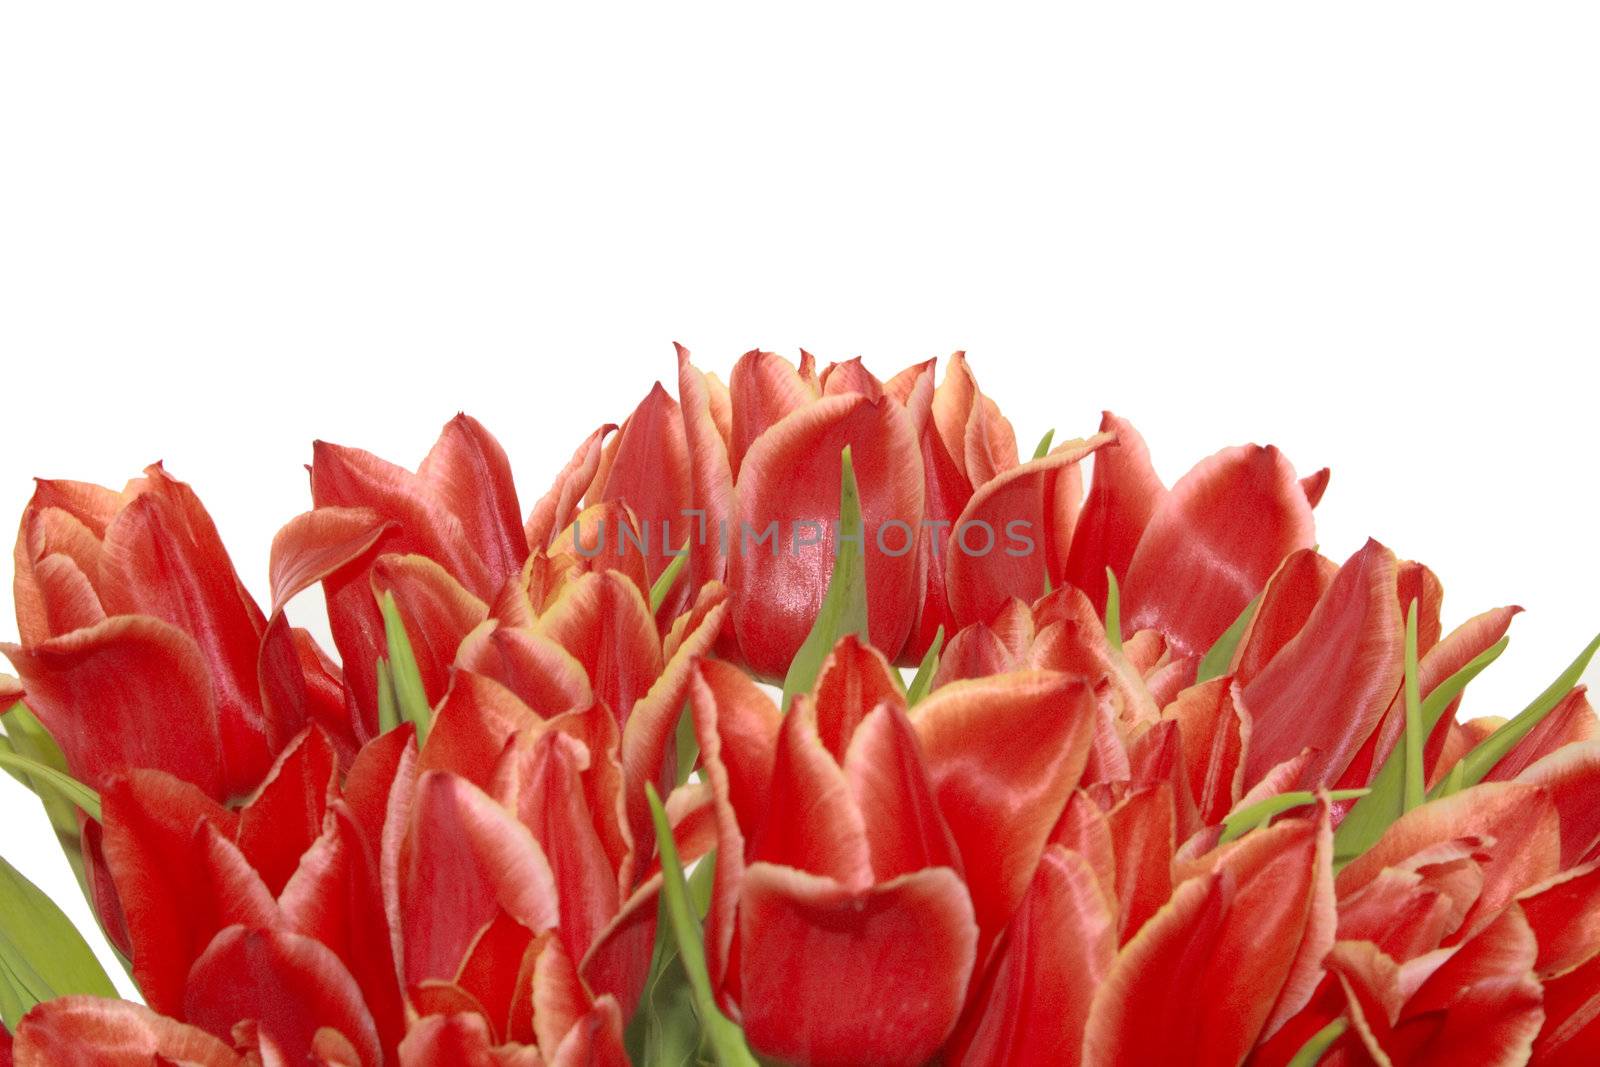 bunch of red tulips for easter isolated over a white background